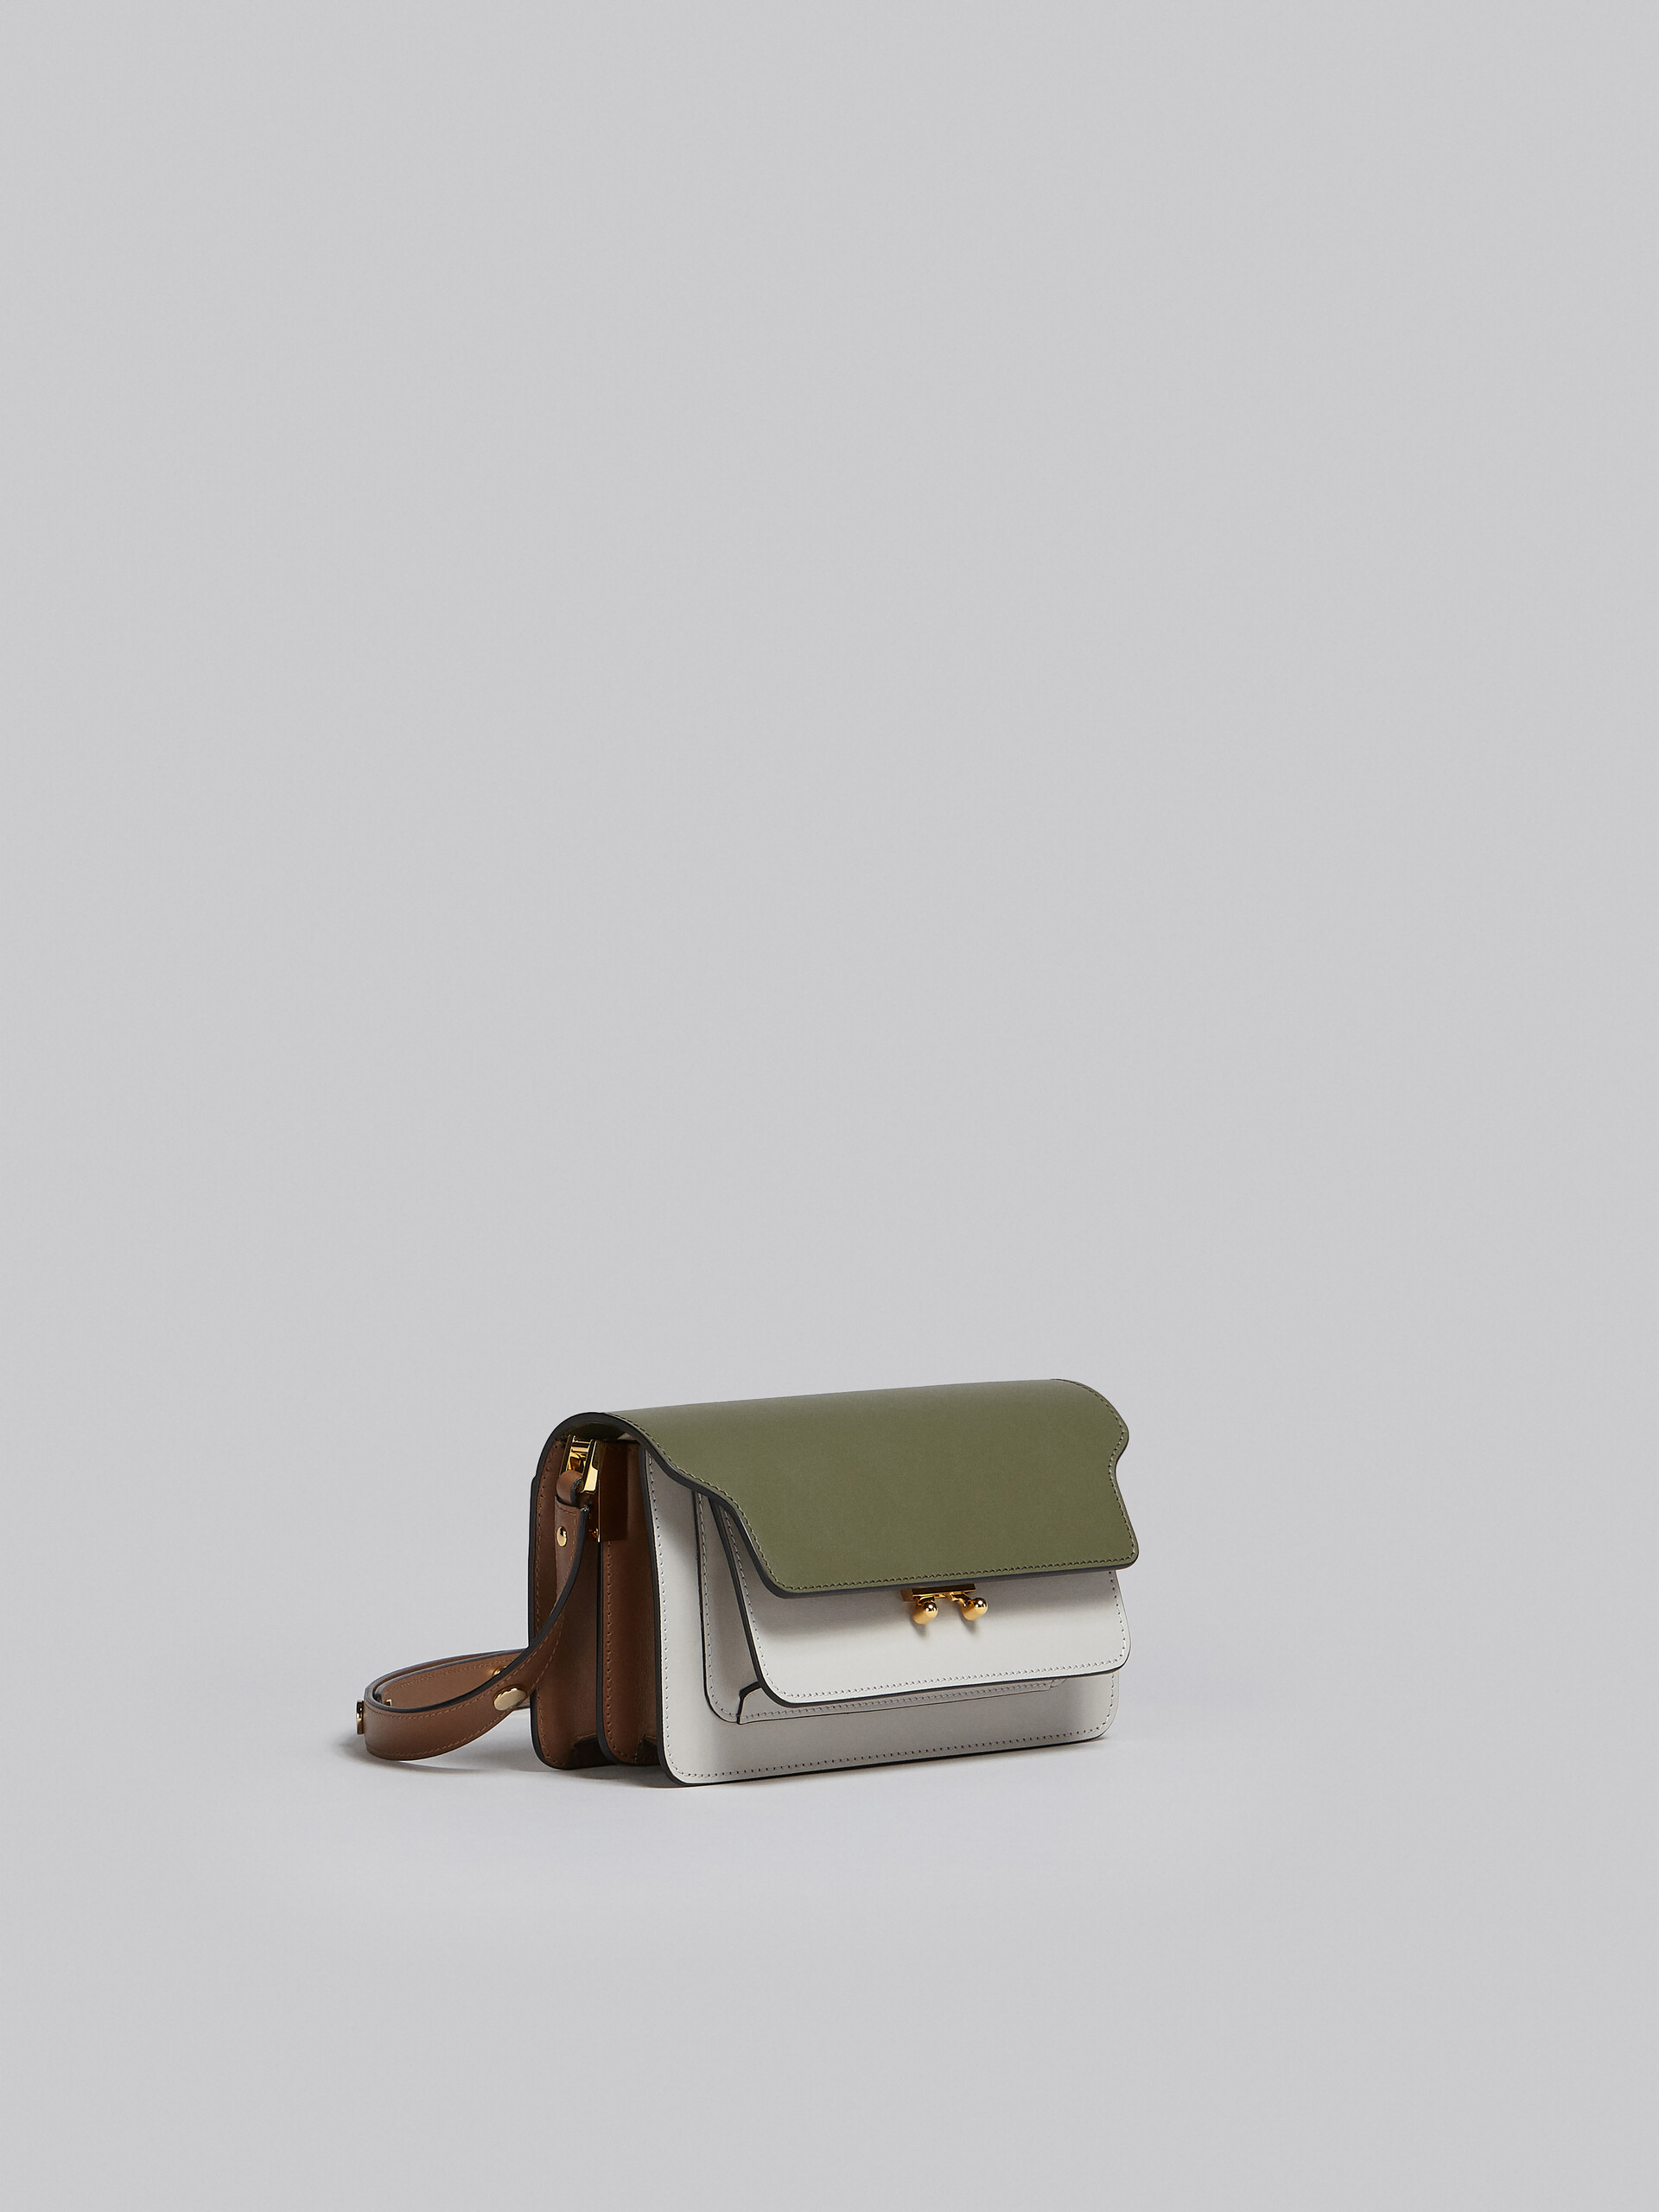 Trunk Bag E/W in green grey and brown leather - Shoulder Bags - Image 5